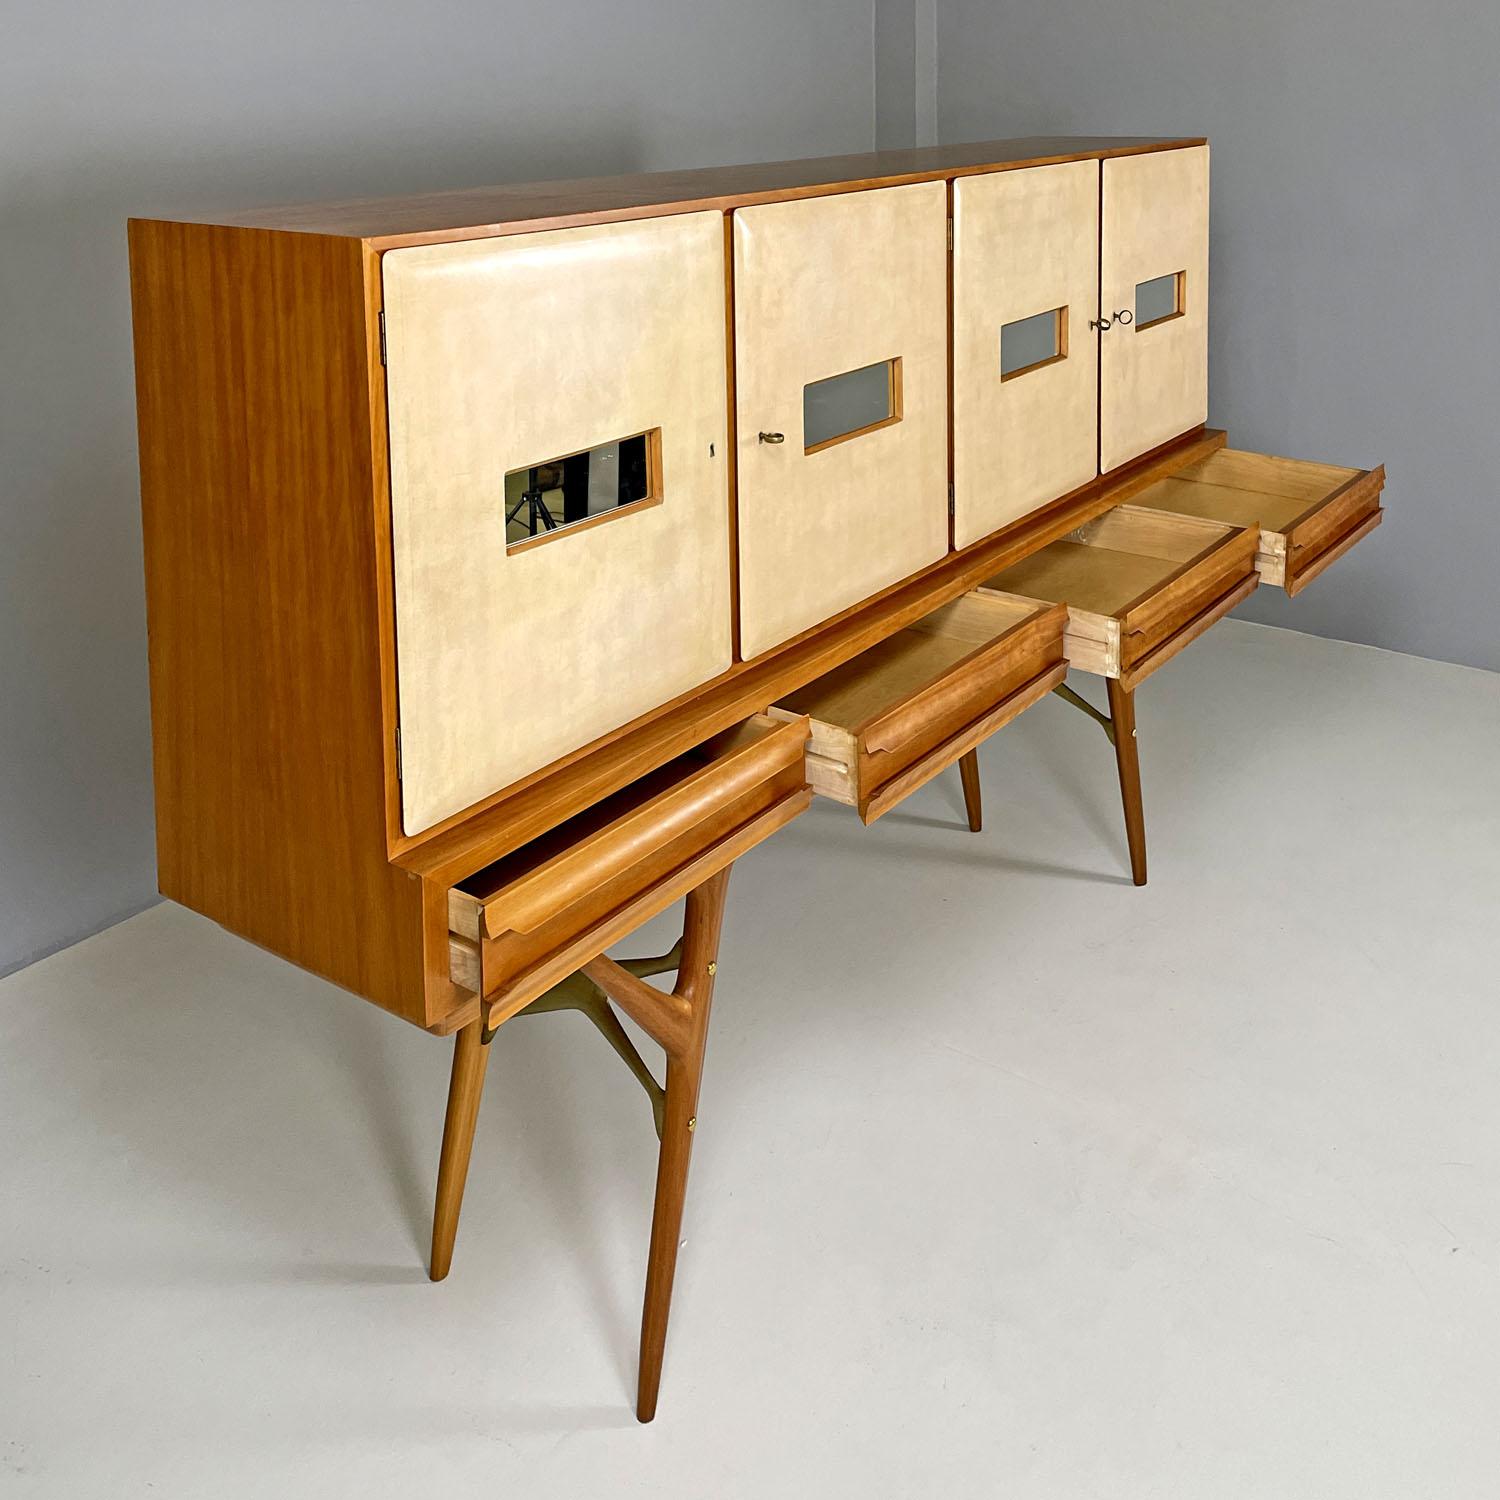 Mirror Italian mid-century modern wood and parchment highboard Palazzi dell'Arte, 1950s For Sale